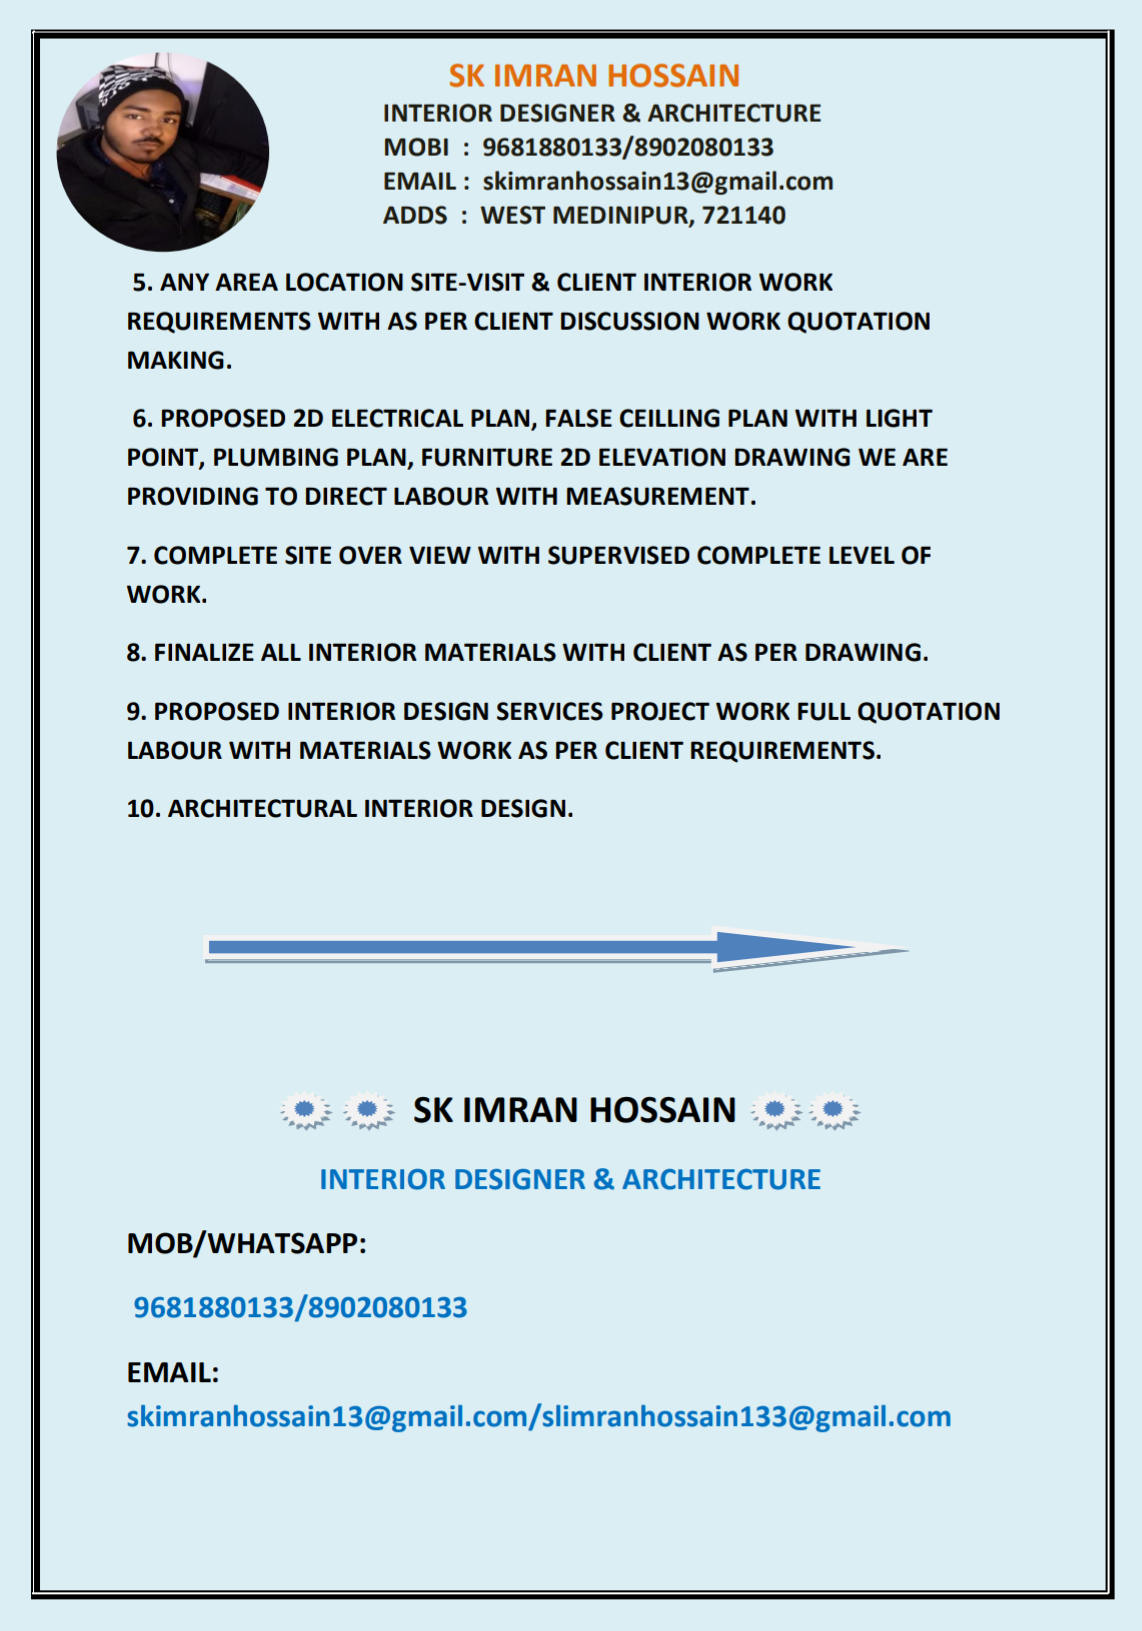 SK IMRAN HOSSAIN
INTERIOR DESIGNER & ARCHITECTURE
MOBI : 9681880133/8902080133
EMAIL : skimranhossain13@gmail.com
ADDS : WEST MEDINIPUR, 721140

5. ANY AREA LOCATION SITE-VISIT & CLIENT INTERIOR WORK
REQUIREMENTS WITH AS PER CLIENT DISCUSSION WORK QUOTATION
MAKING.

6. PROPOSED 2D ELECTRICAL PLAN, FALSE CEILLING PLAN WITH LIGHT
POINT, PLUMBING PLAN, FURNITURE 2D ELEVATION DRAWING WE ARE
PROVIDING TO DIRECT LABOUR WITH MEASUREMENT.

7. COMPLETE SITE OVER VIEW WITH SUPERVISED COMPLETE LEVEL OF
WORK.

8. FINALIZE ALL INTERIOR MATERIALS WITH CLIENT AS PER DRAWING.

9. PROPOSED INTERIOR DESIGN SERVICES PROJECT WORK FULL QUOTATION
LABOUR WITH MATERIALS WORK AS PER CLIENT REQUIREMENTS.

10. ARCHITECTURAL INTERIOR DESIGN.

—

®:.®: SKIMRAN HOSSAIN »:
INTERIOR DESIGNER & ARCHITECTURE
MOB/WHATSAPP:
9681880133/8902080133

EMAIL:
skimranhossain13@gmail.com/slimranhossain133@gmail.com